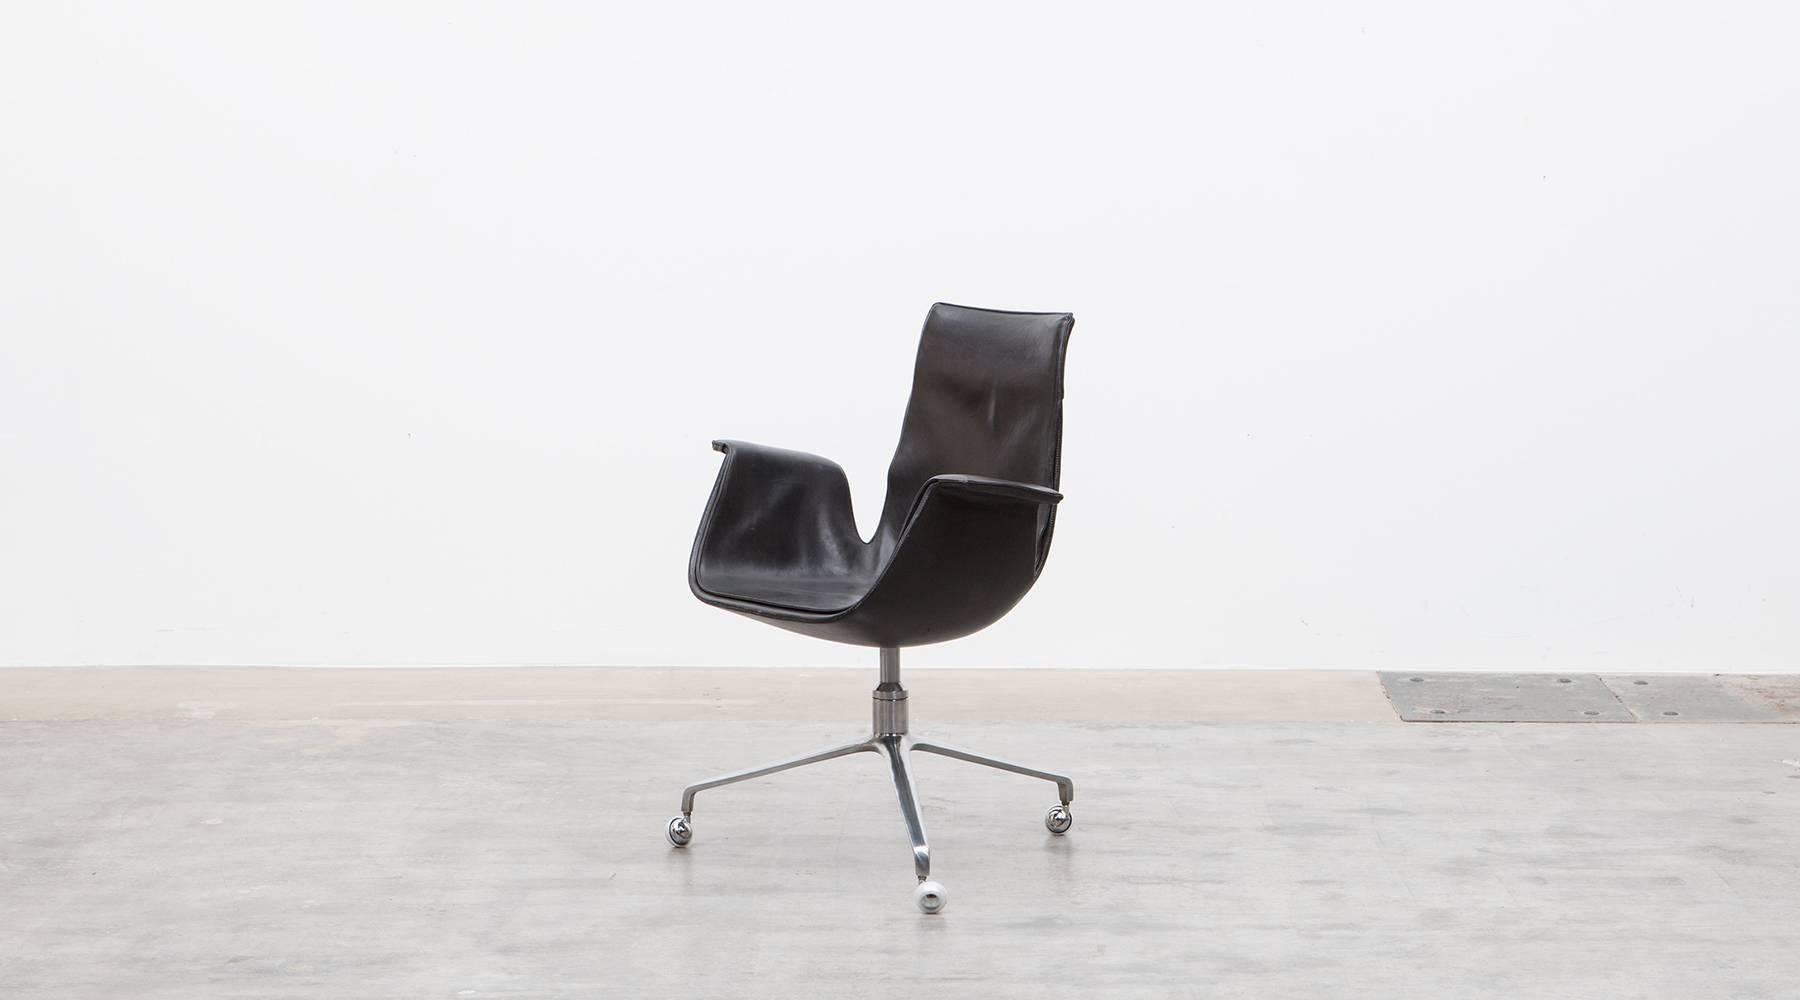 Black leather, chromium-plated, swivel chair by Fabricius and Kastholm, Germany, 1960.

Beautiful black leather swivel armchairs on chromium-plated metal base in great condition. Designed by Preben Fabricius and Jørgen Kastholm. Manufactured by